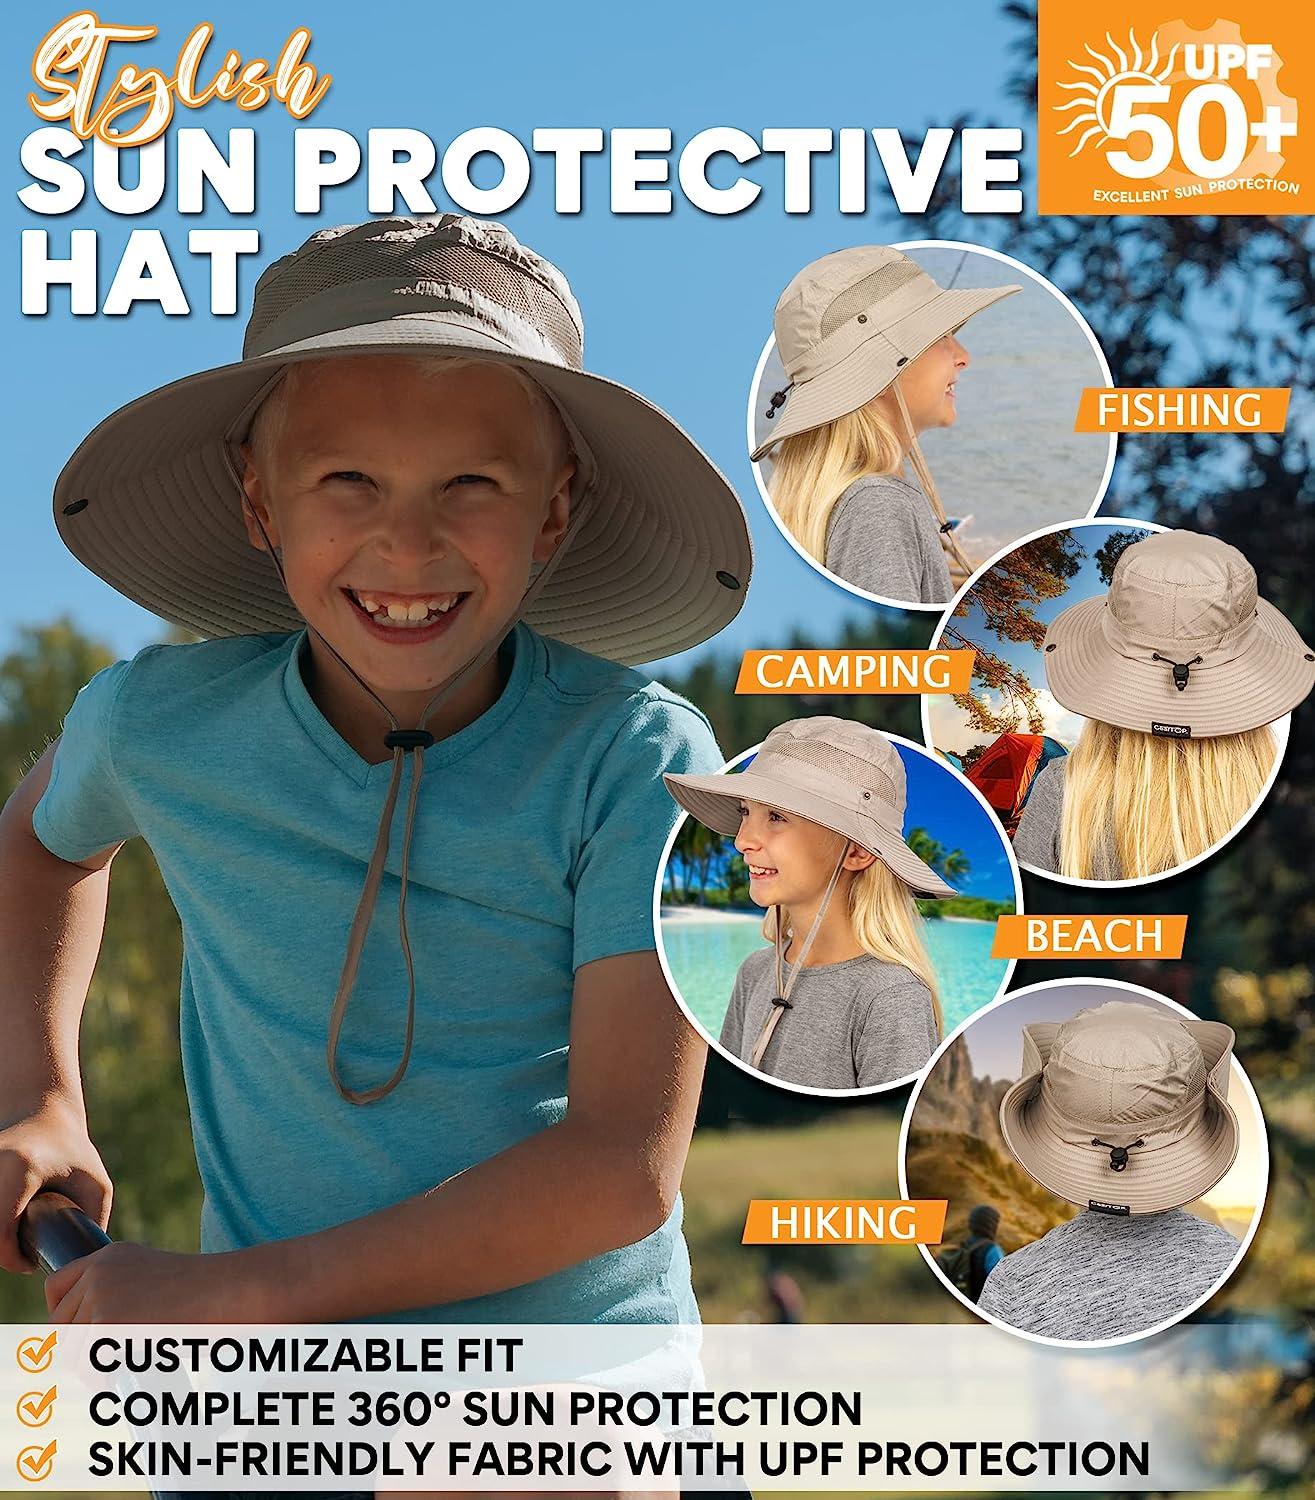 GearTOP UPF 50+ Kids Sun hat to Protect Against UV Sun Rays